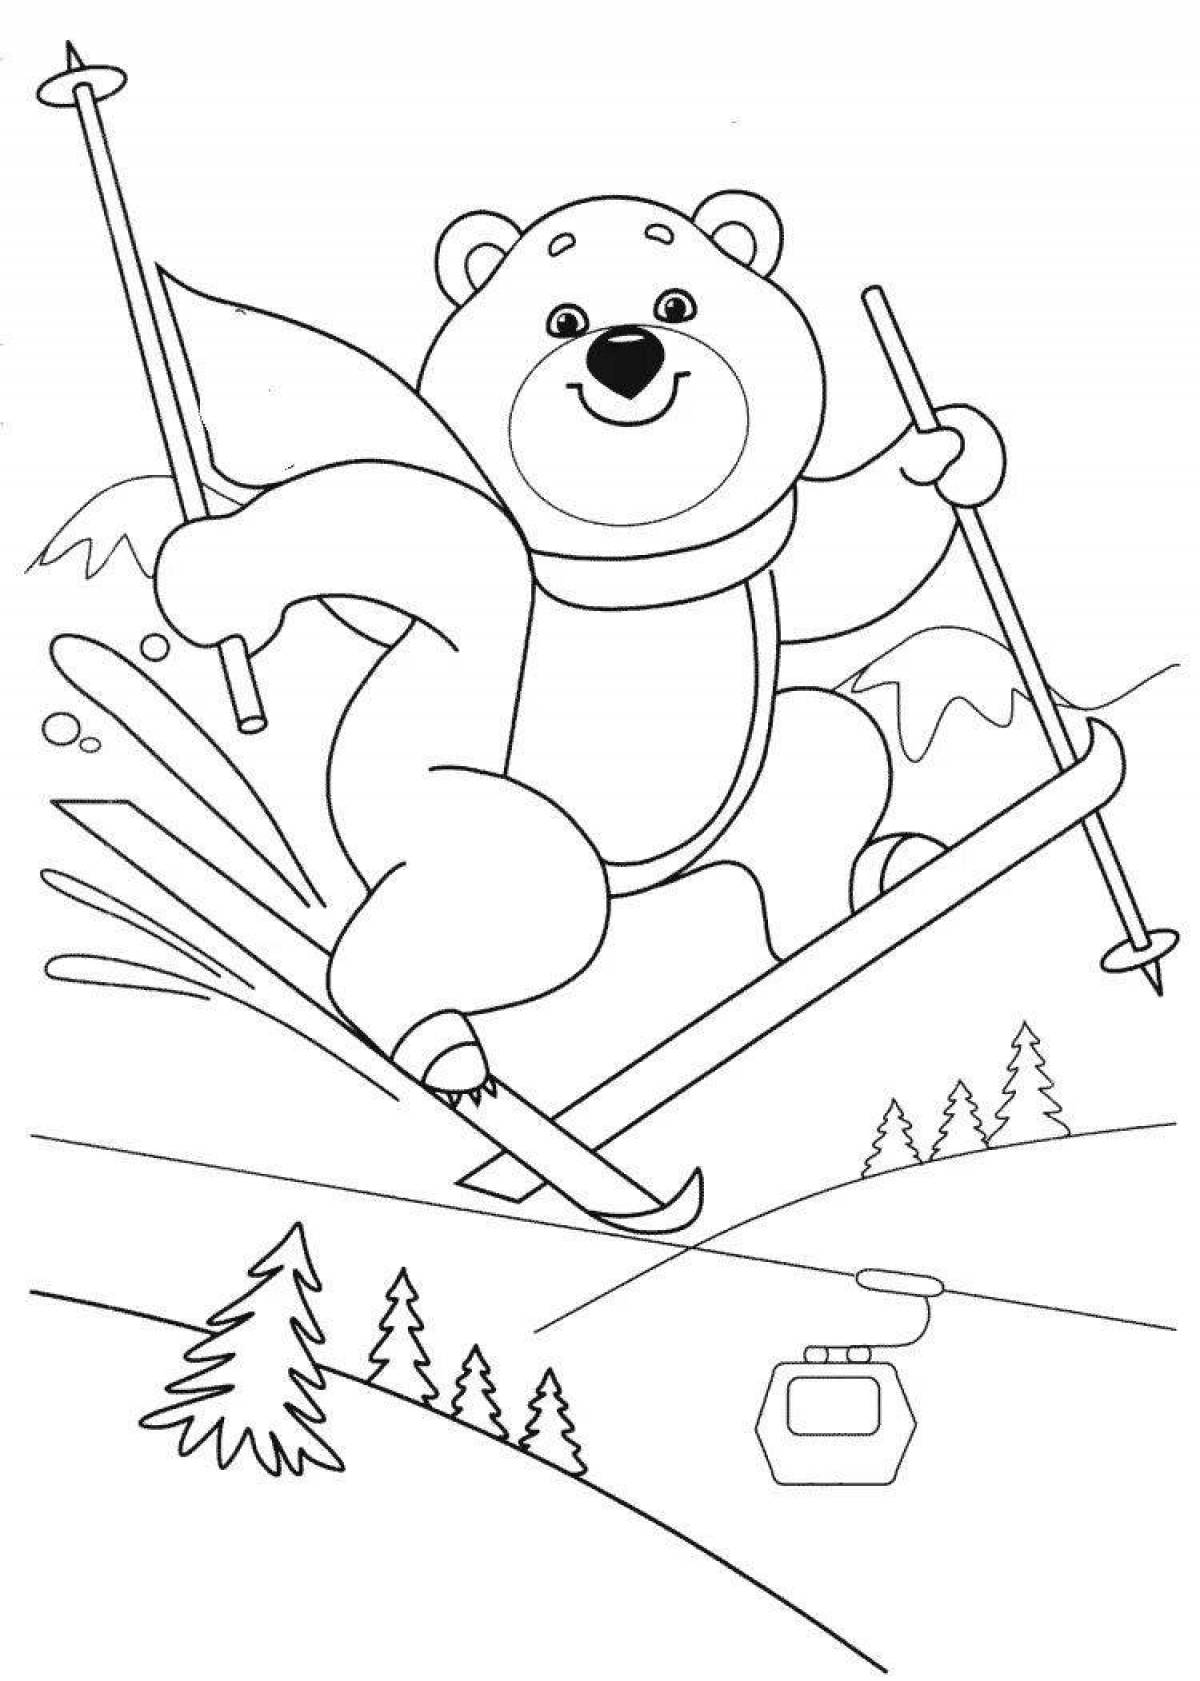 Glorious winter sports coloring book